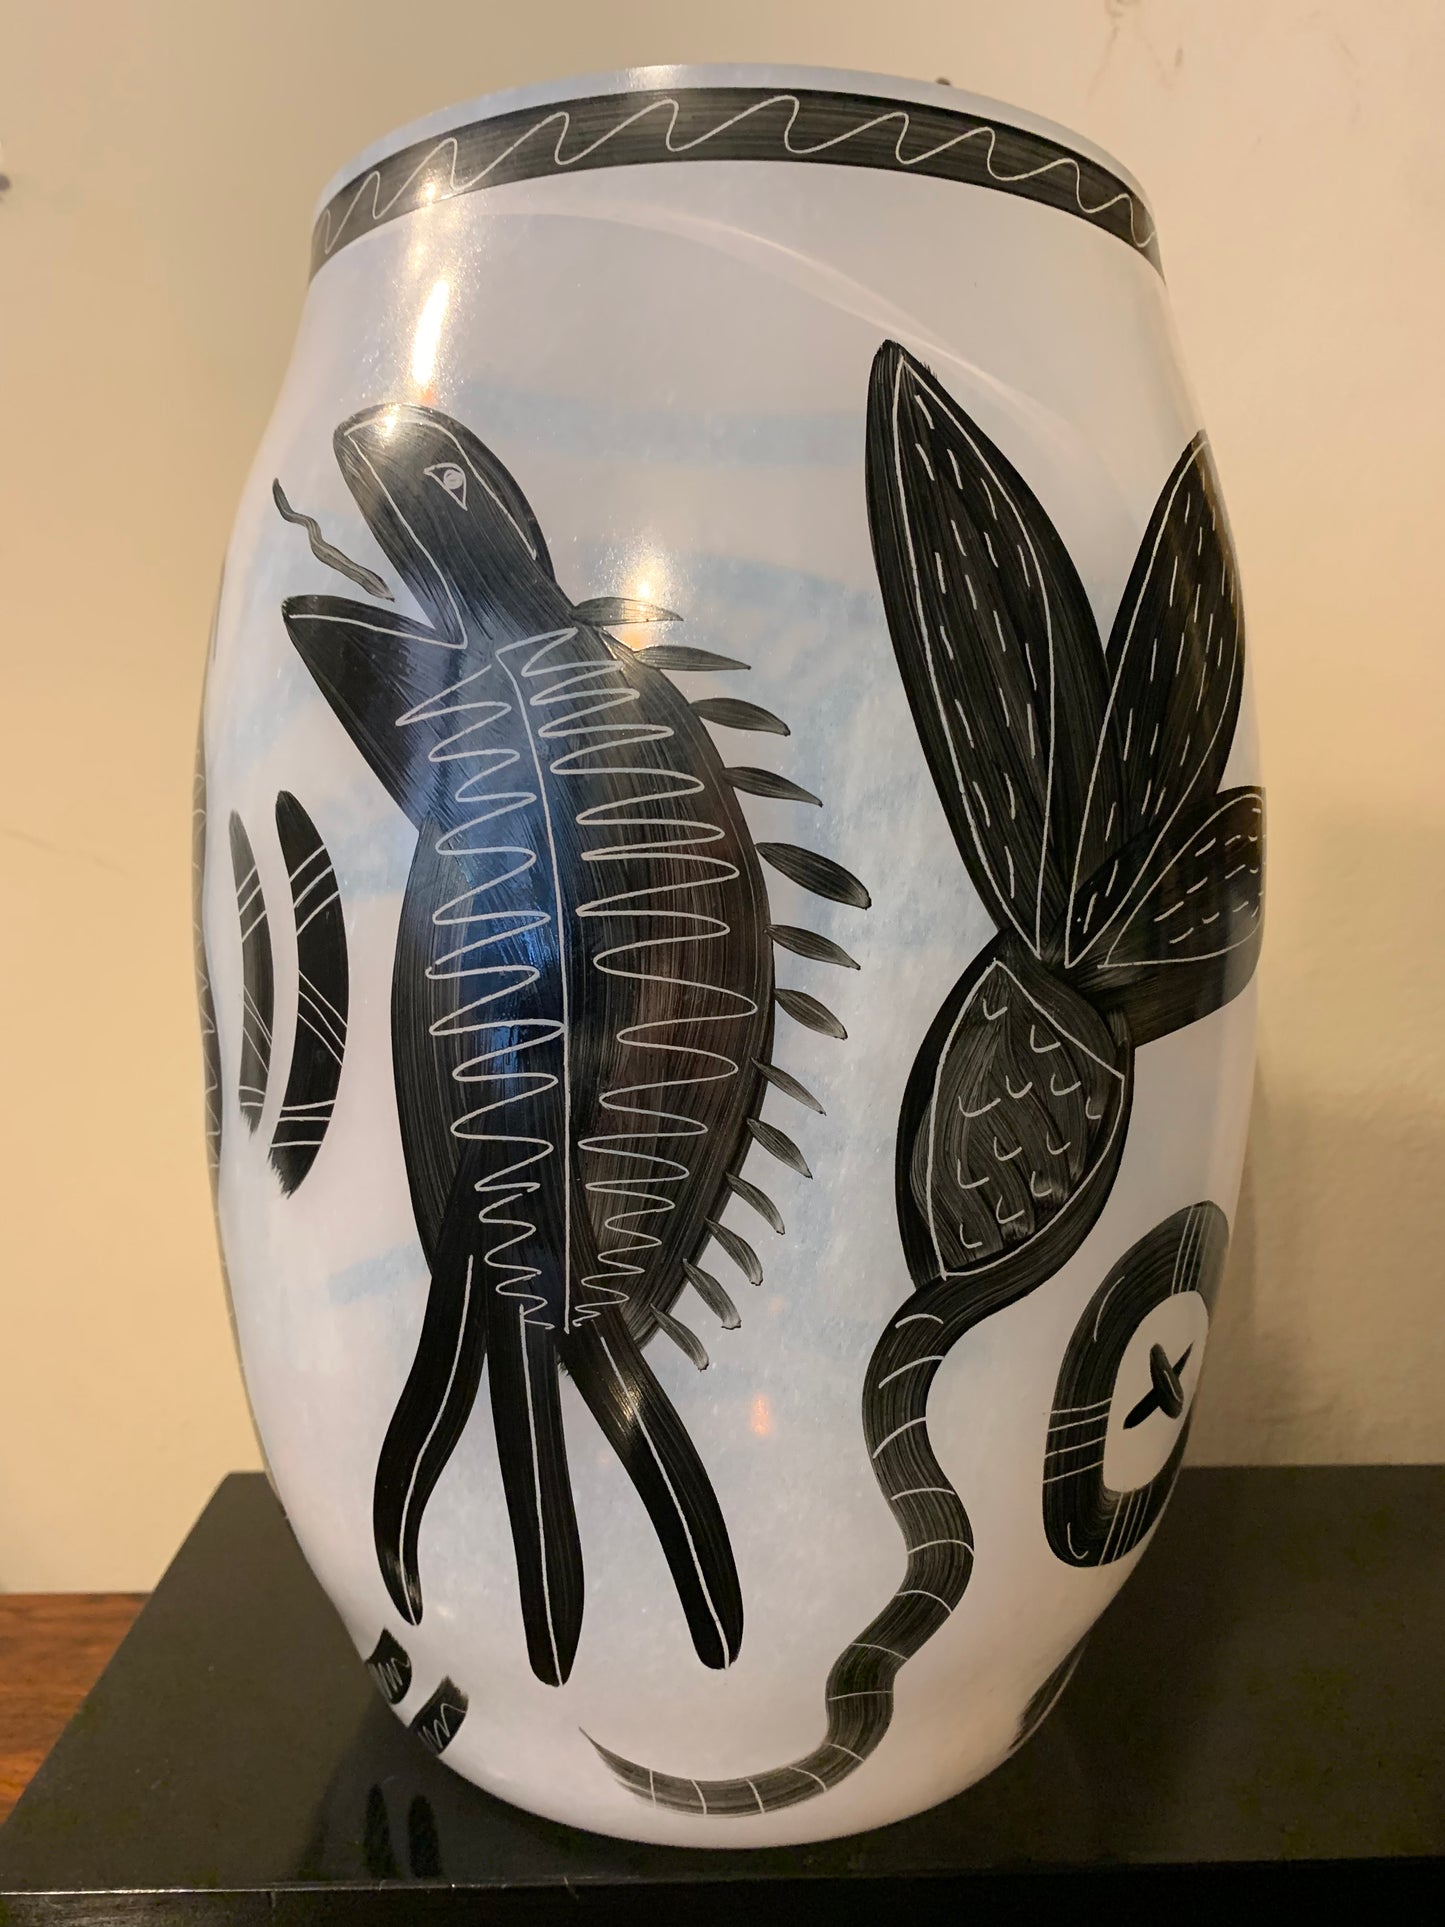 Kosta Boda. Artistic painted Glass. Ulrica Hydman-Vallien (Sweden, 1938-2018) A late 20th century glass vase by Ulrica Hydman-Vallien